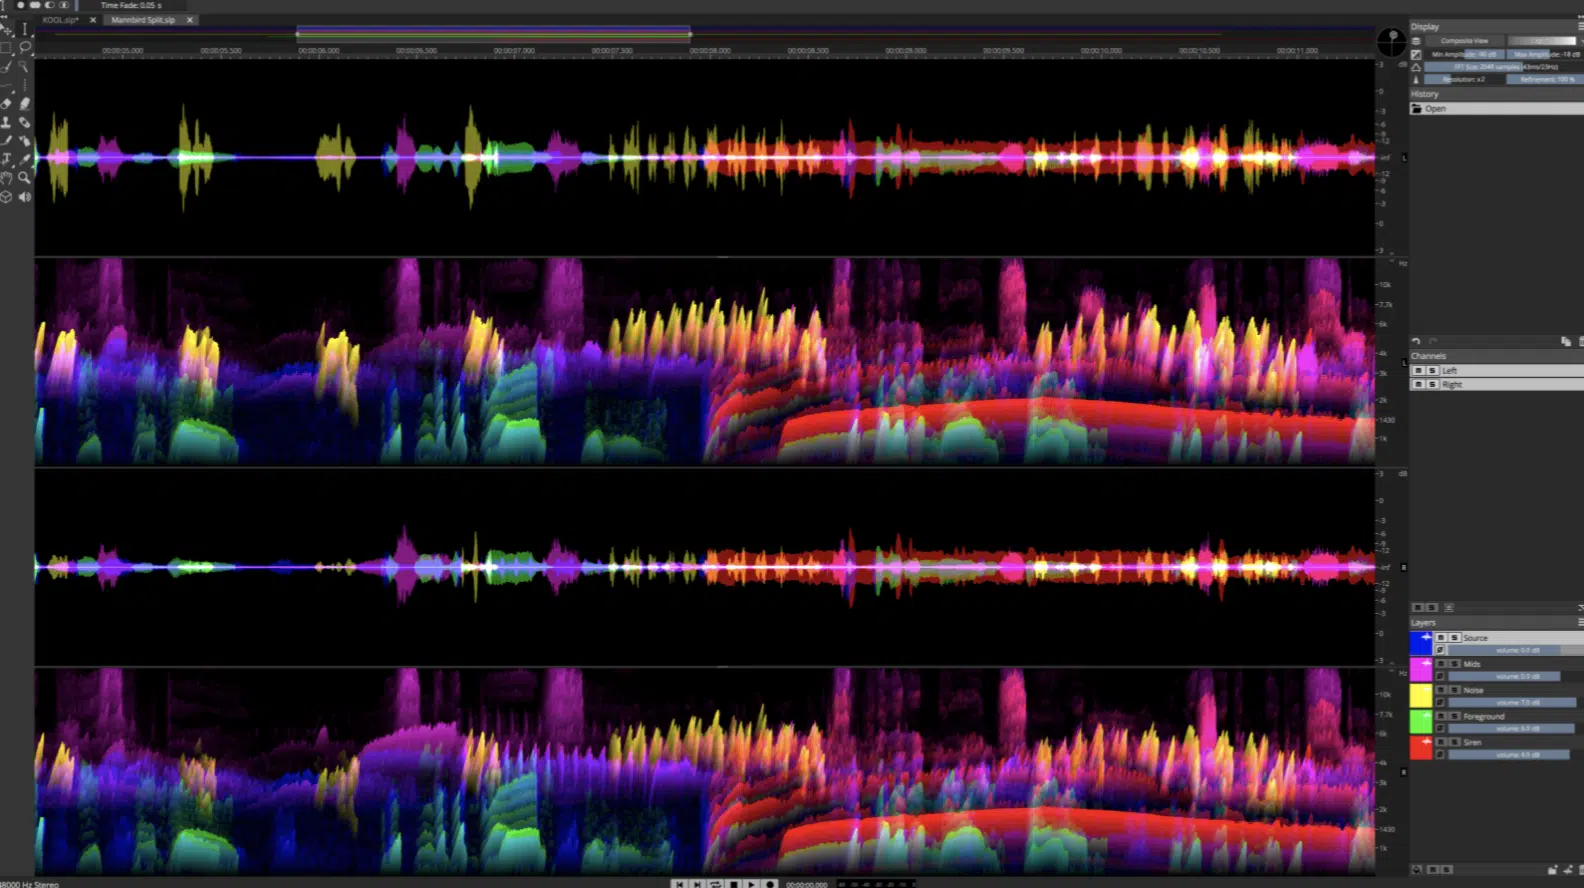 Spectral Editing - Unison